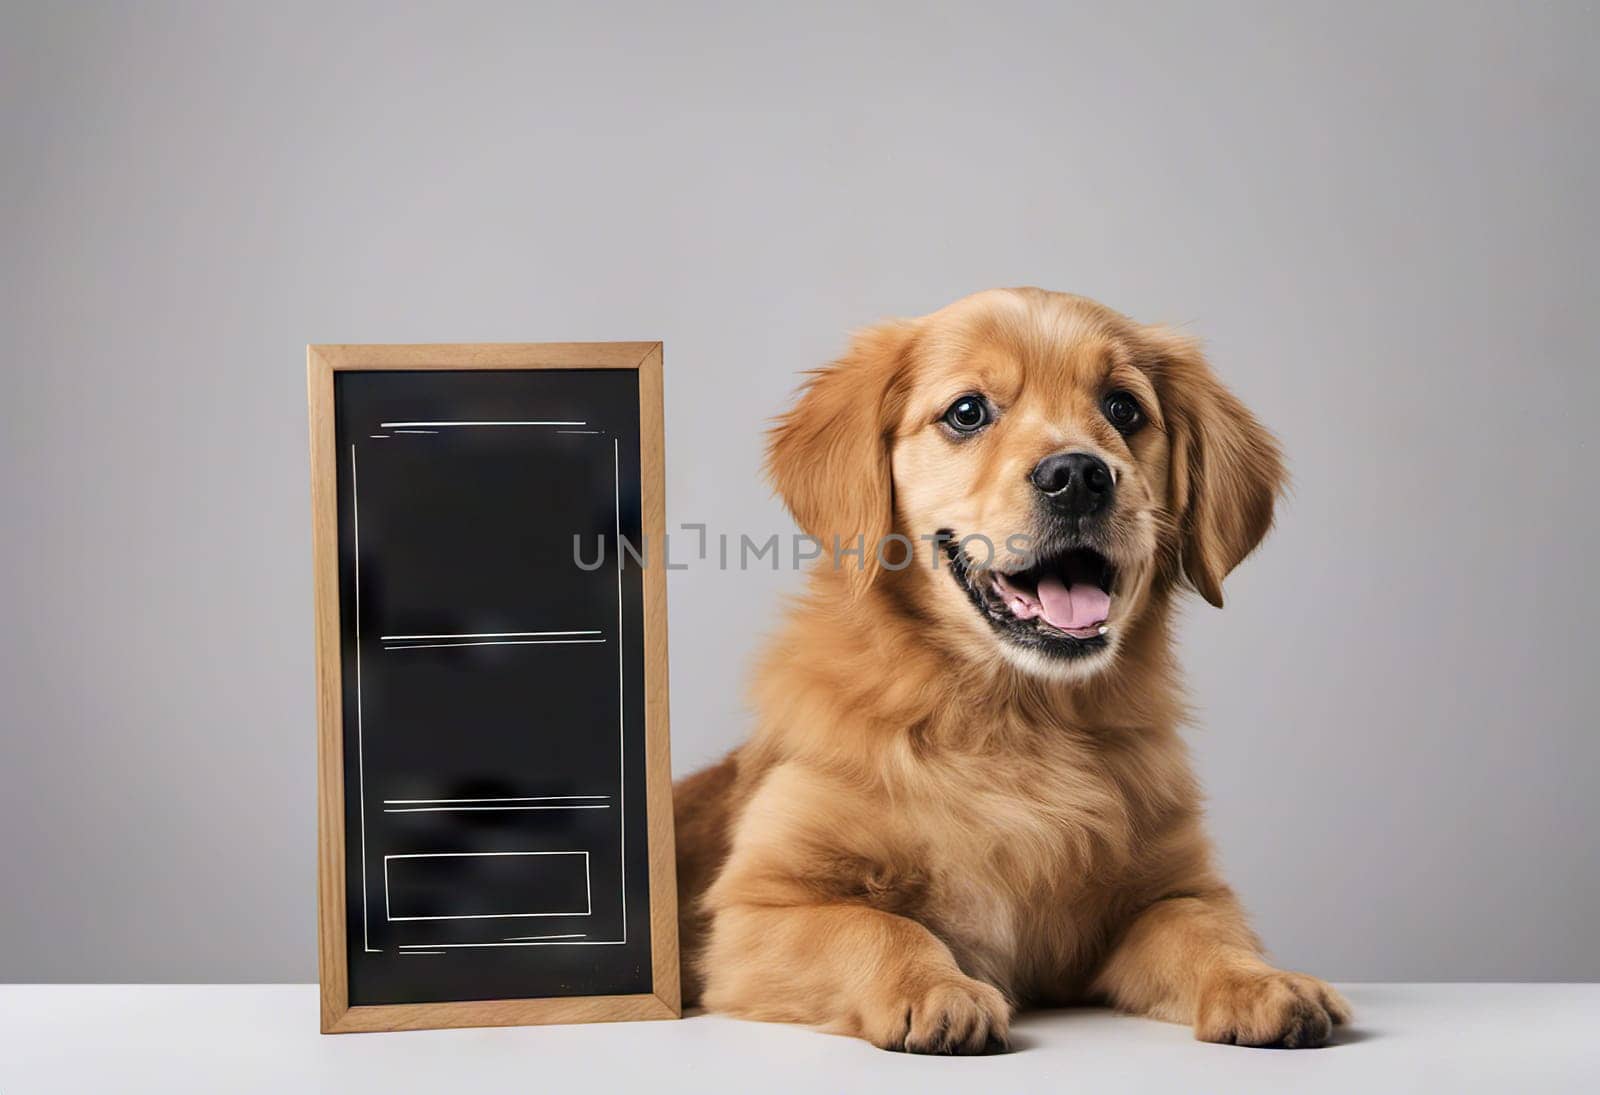 Funny puppy with banner for your advertising, mockup, concept of discounts and sales, on light background